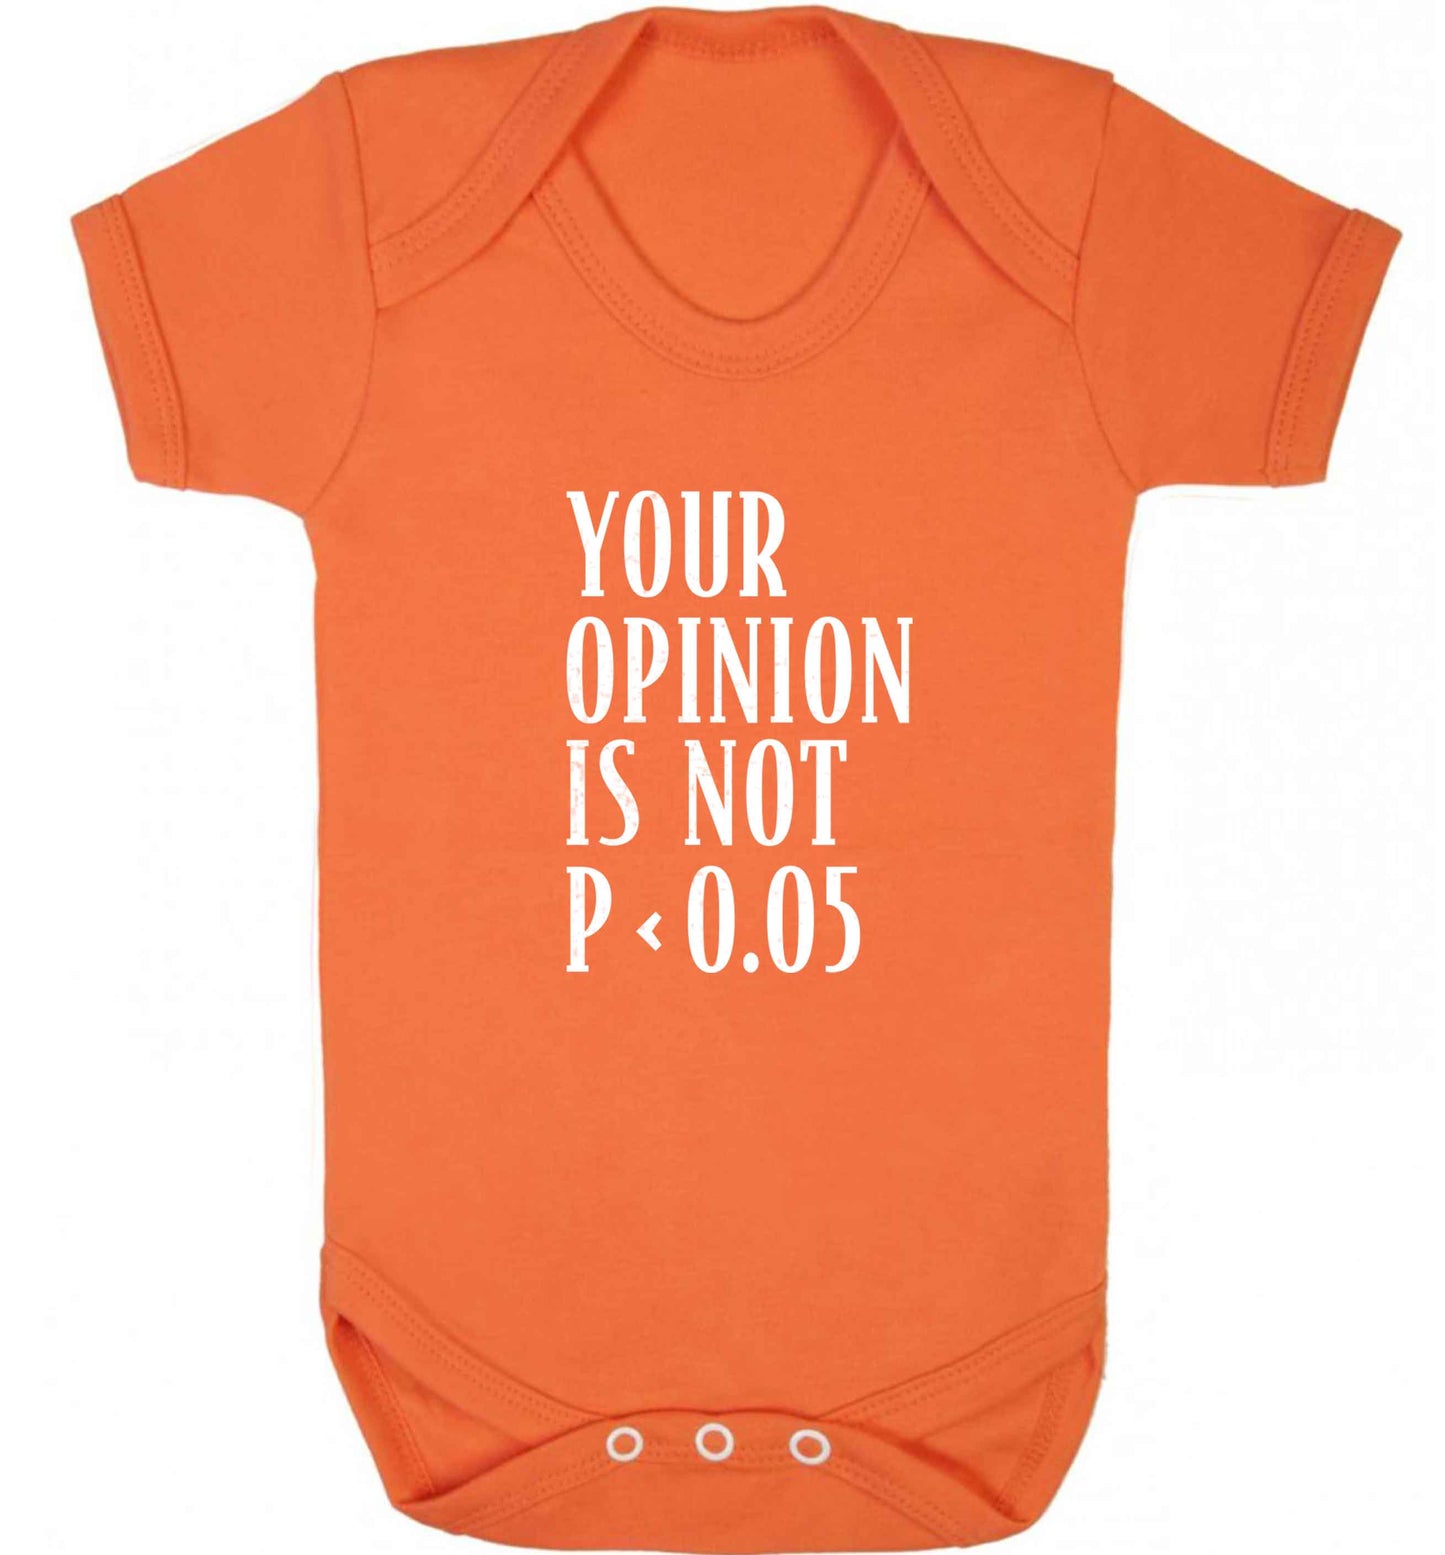 Your opinion is not P < 0.05baby vest orange 18-24 months